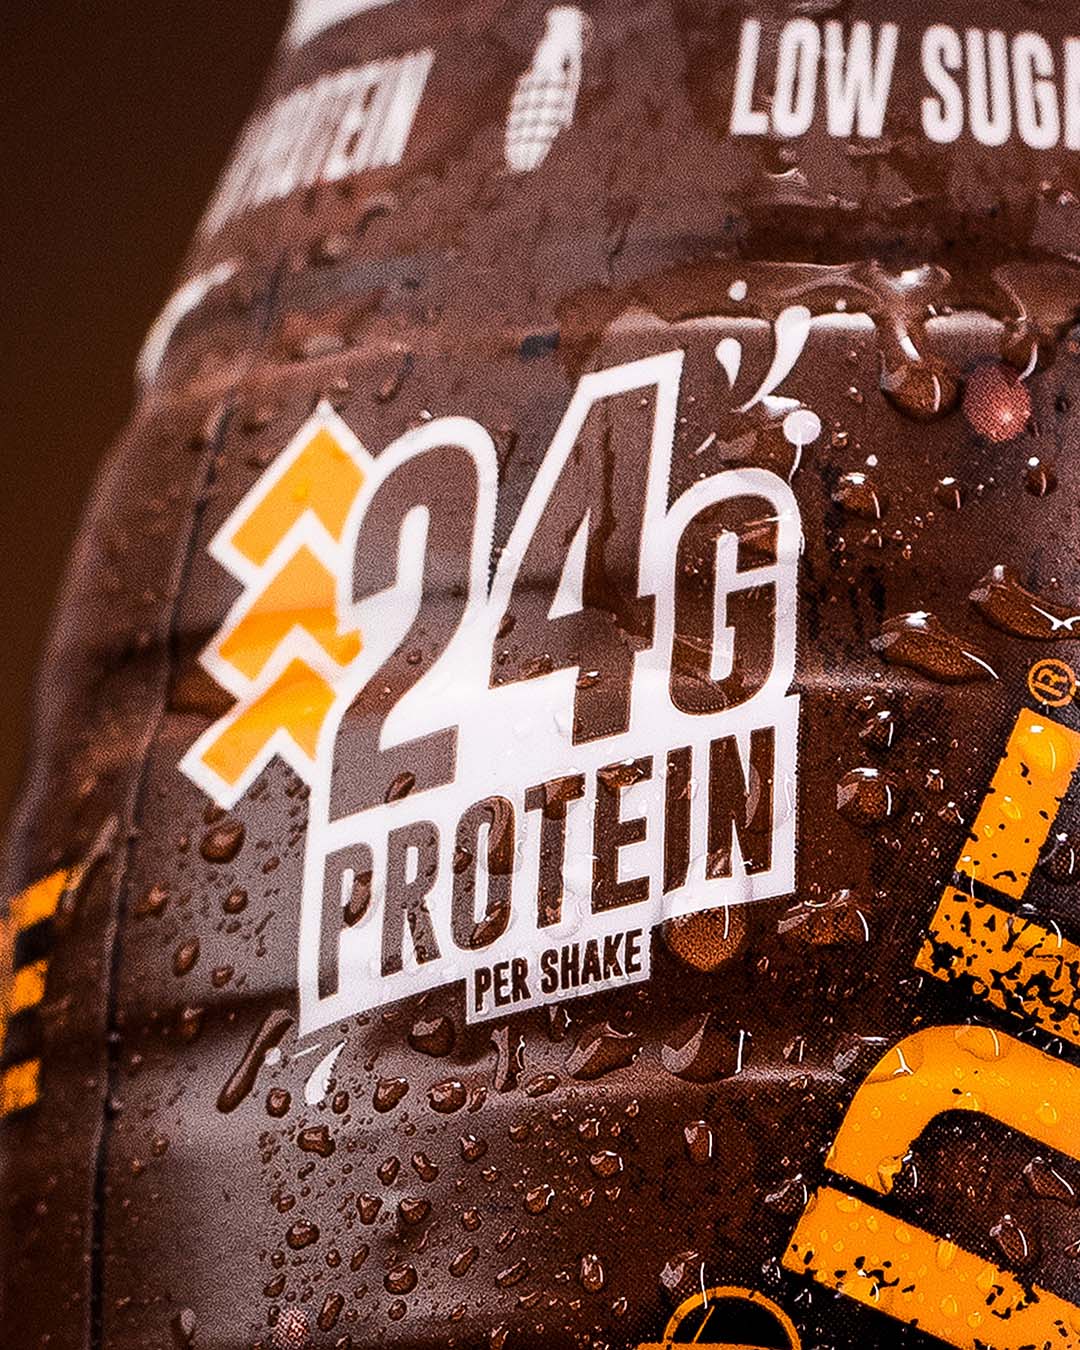 Label text "24g protein per shake" for Brownie Protein Shake